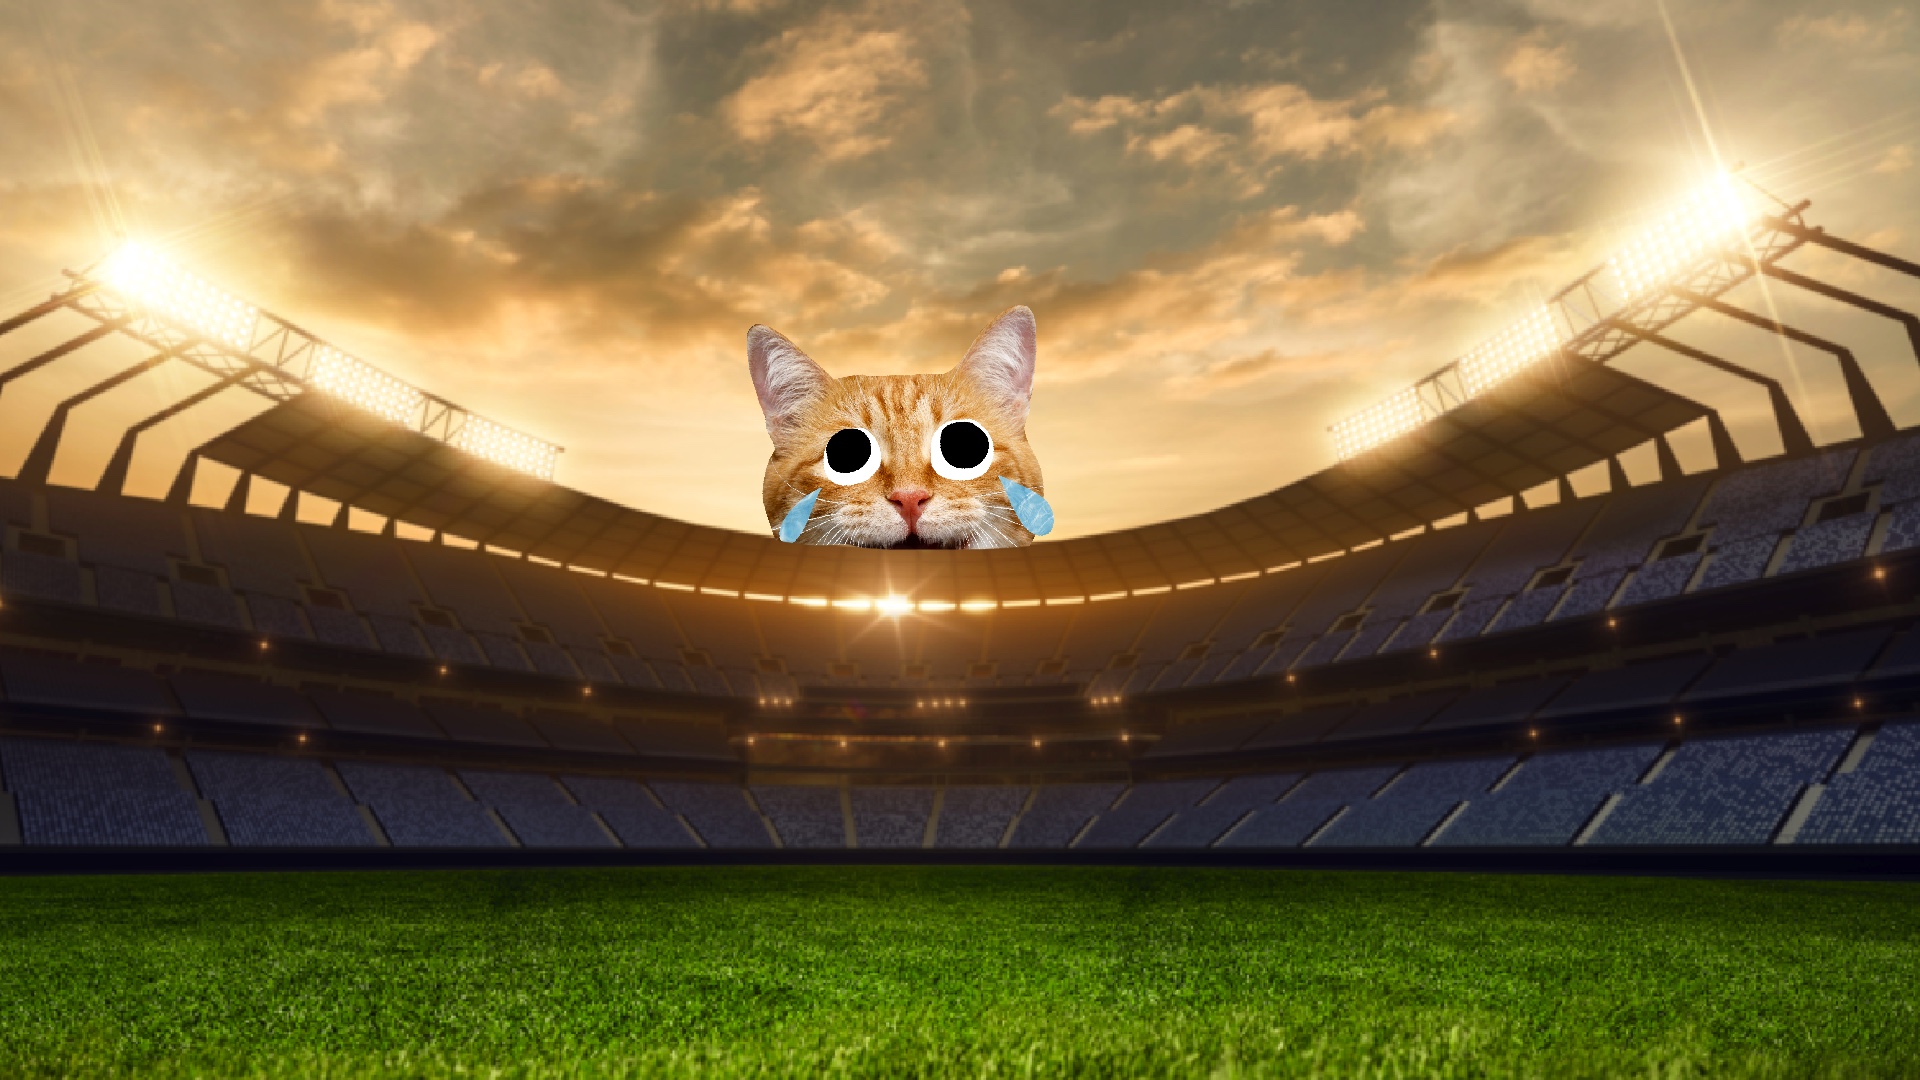 A large cat looms over a stadium at sunset